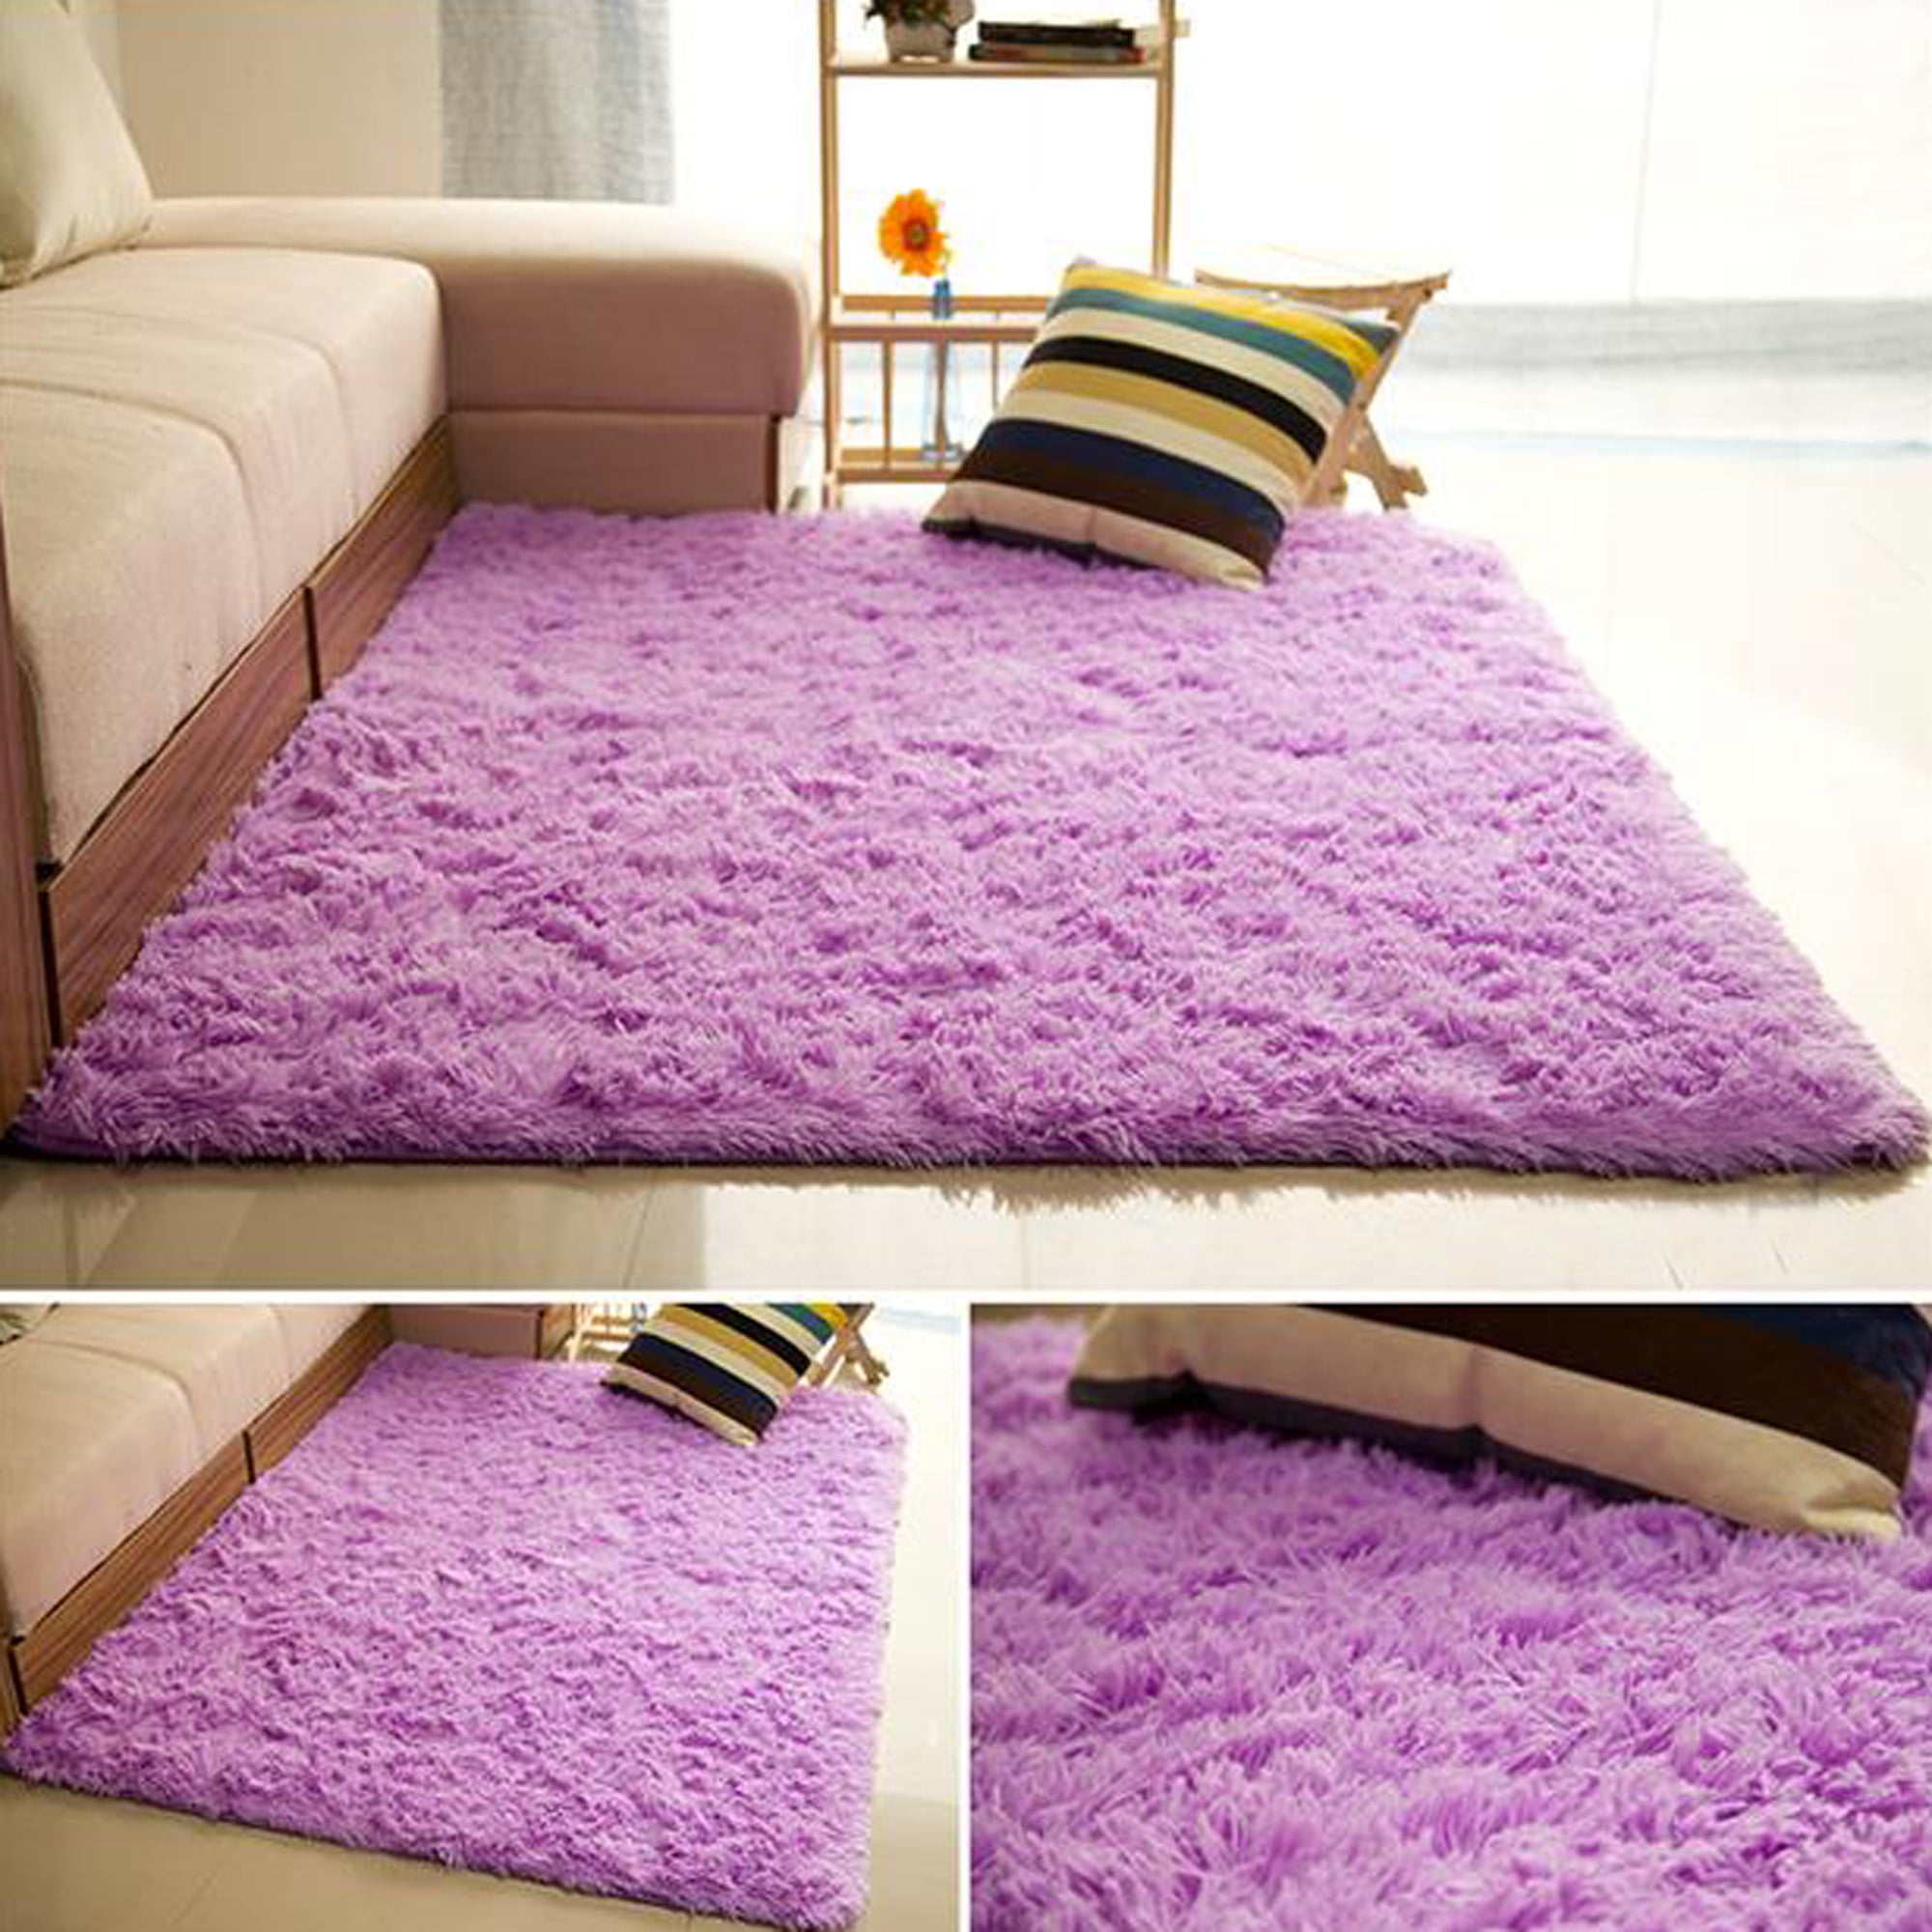 Ultra Soft Gy Rug Fluffy Area Rugs, Lavender Rugs For Nursery